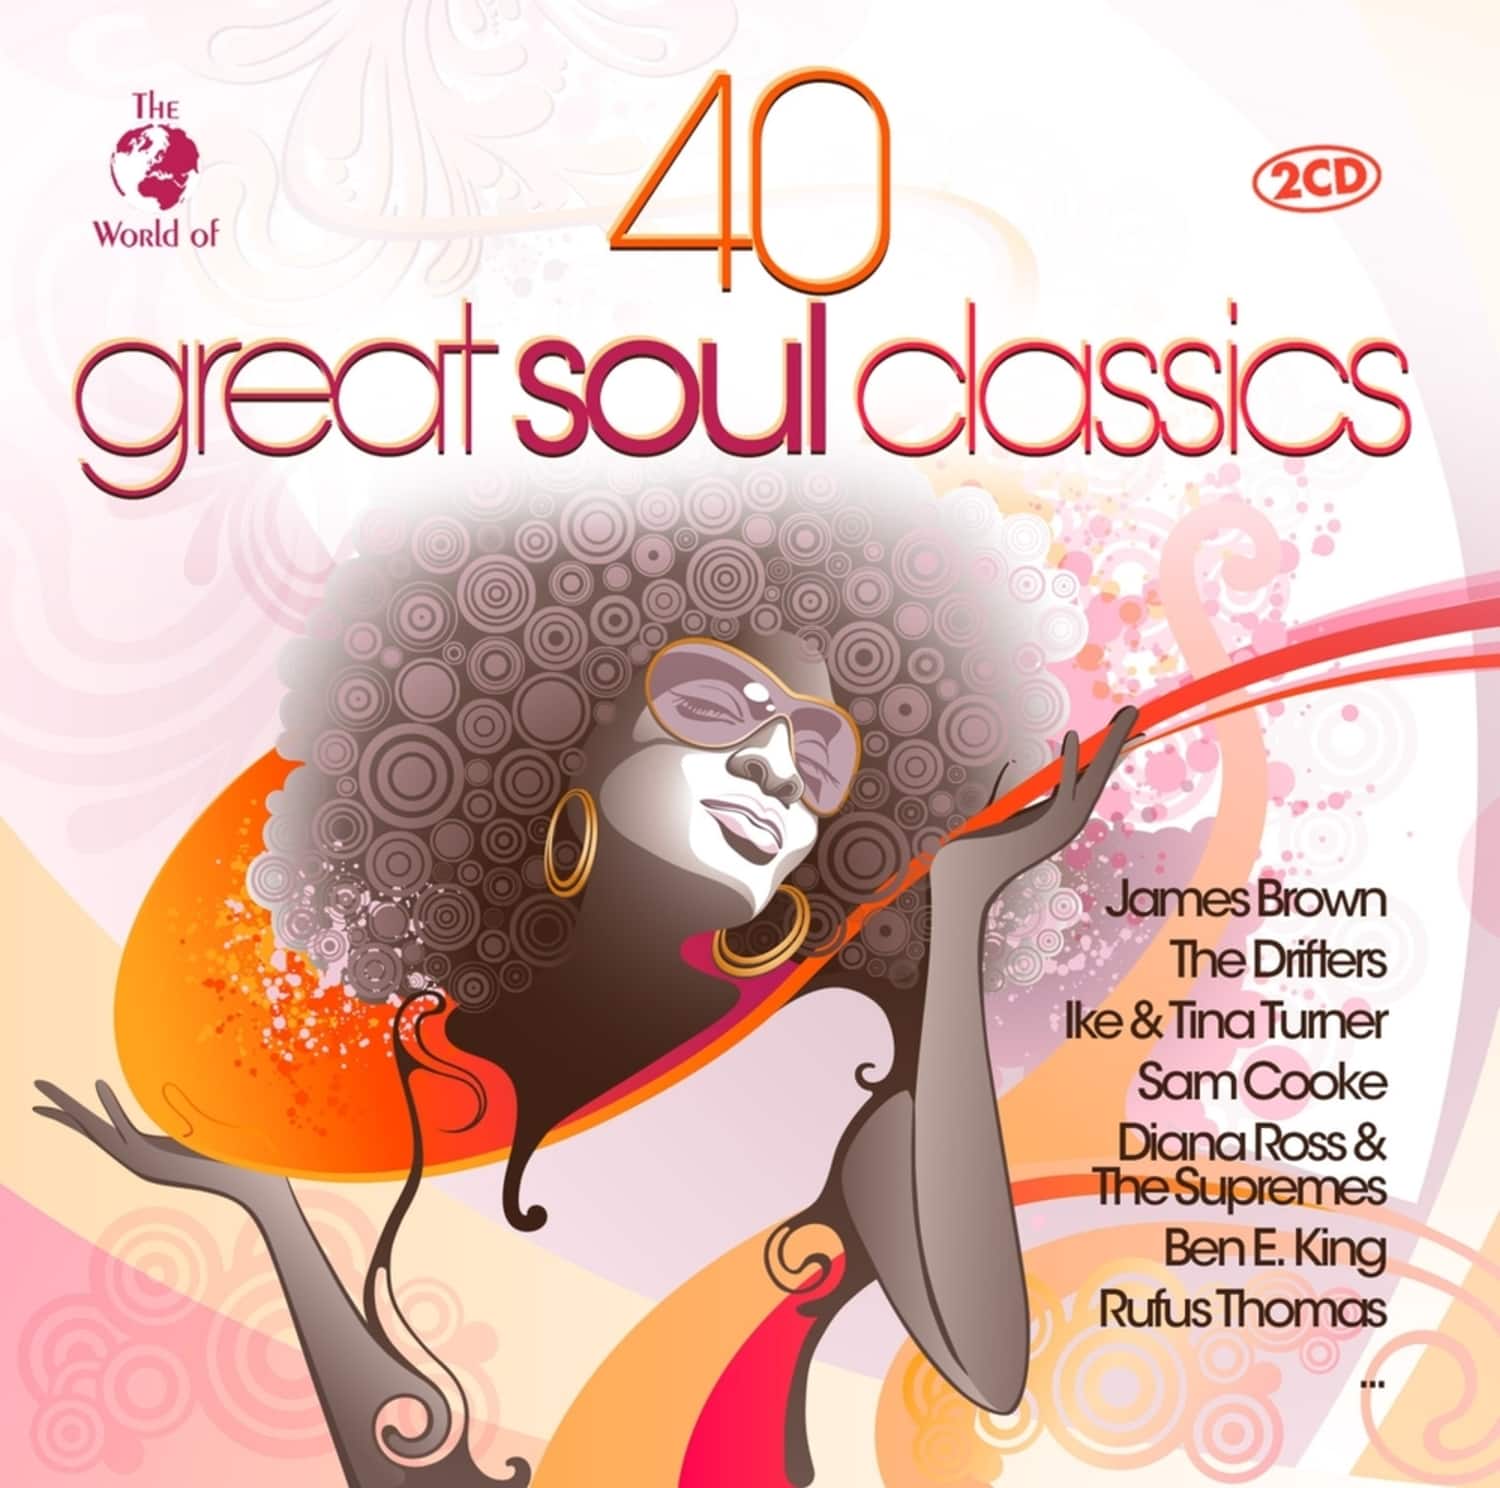 Diana Ross, Drifters, The-Brown, James - 40 GREAT SOUL CLASSICS 